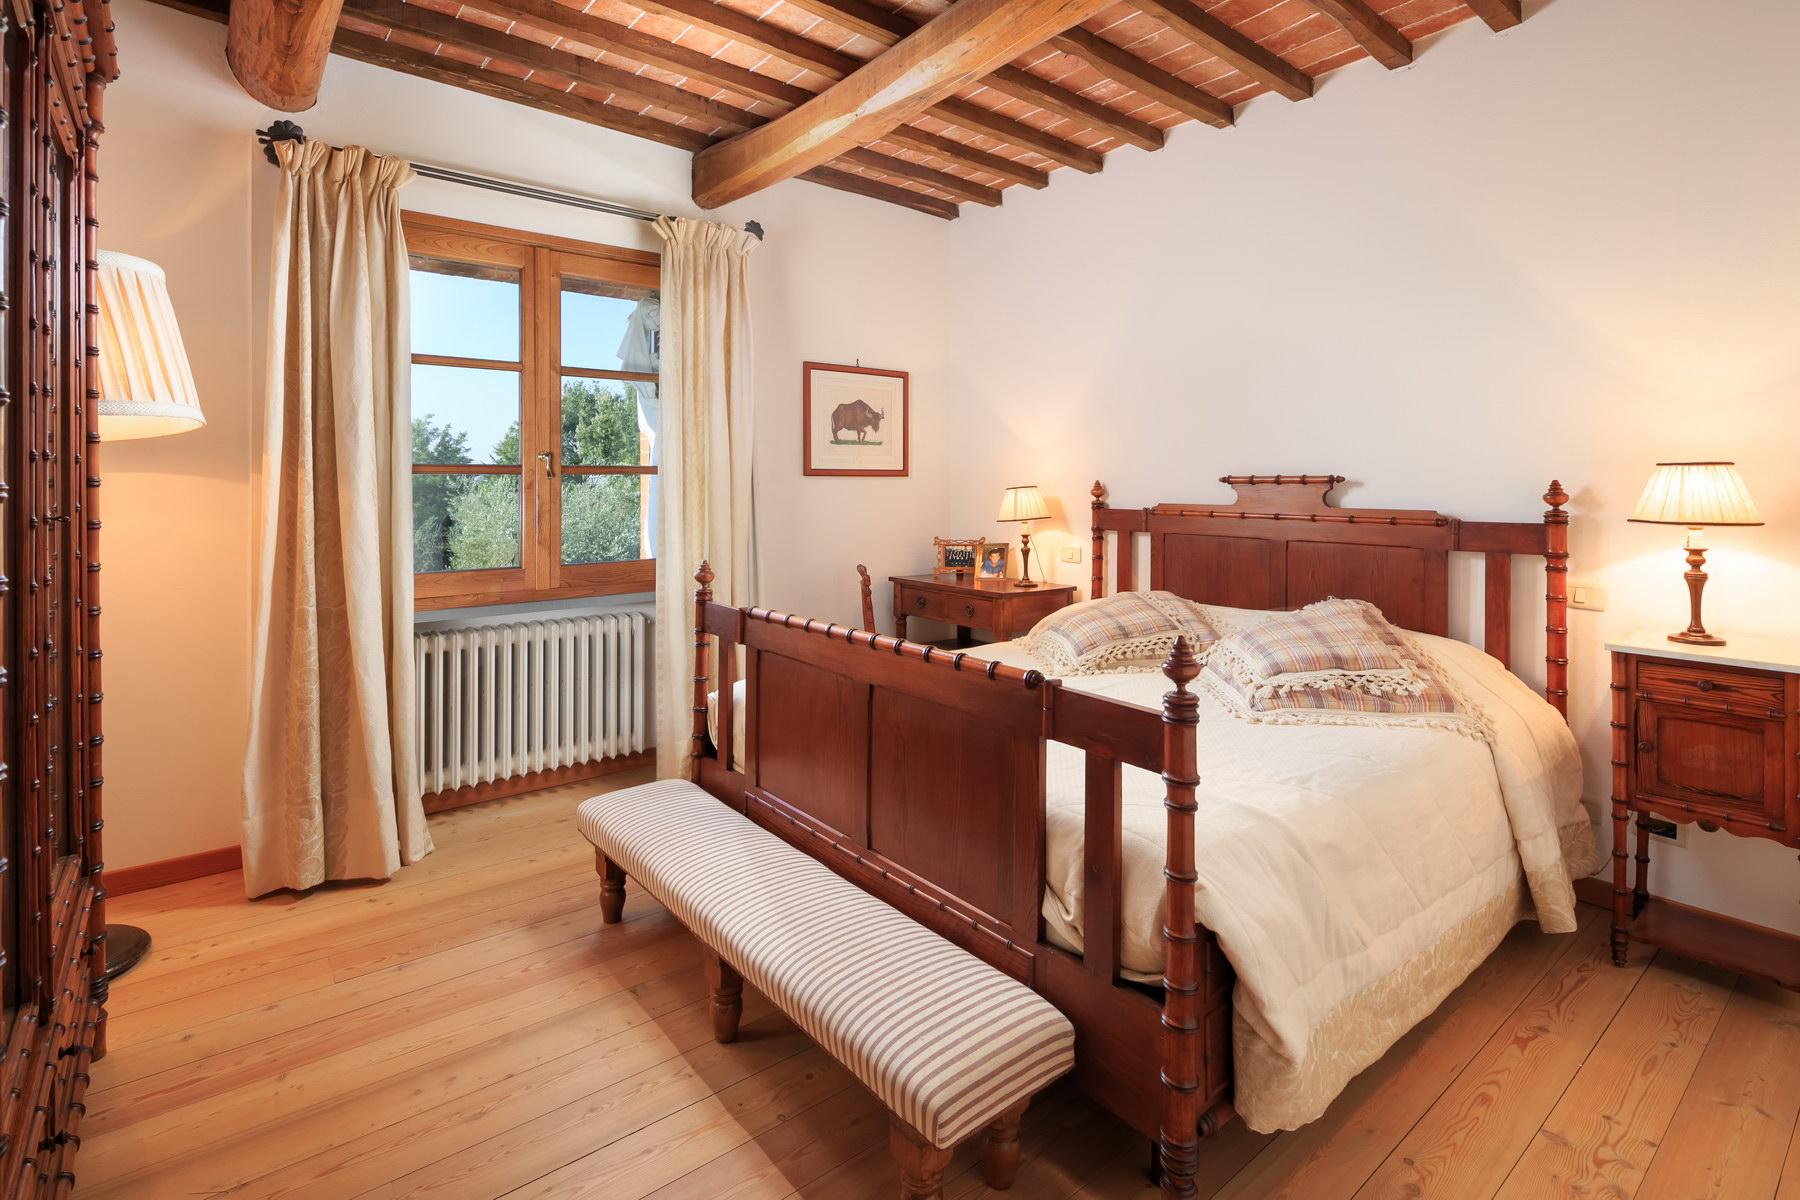 Wonderful villa with spectacular views of montepulciano - 19